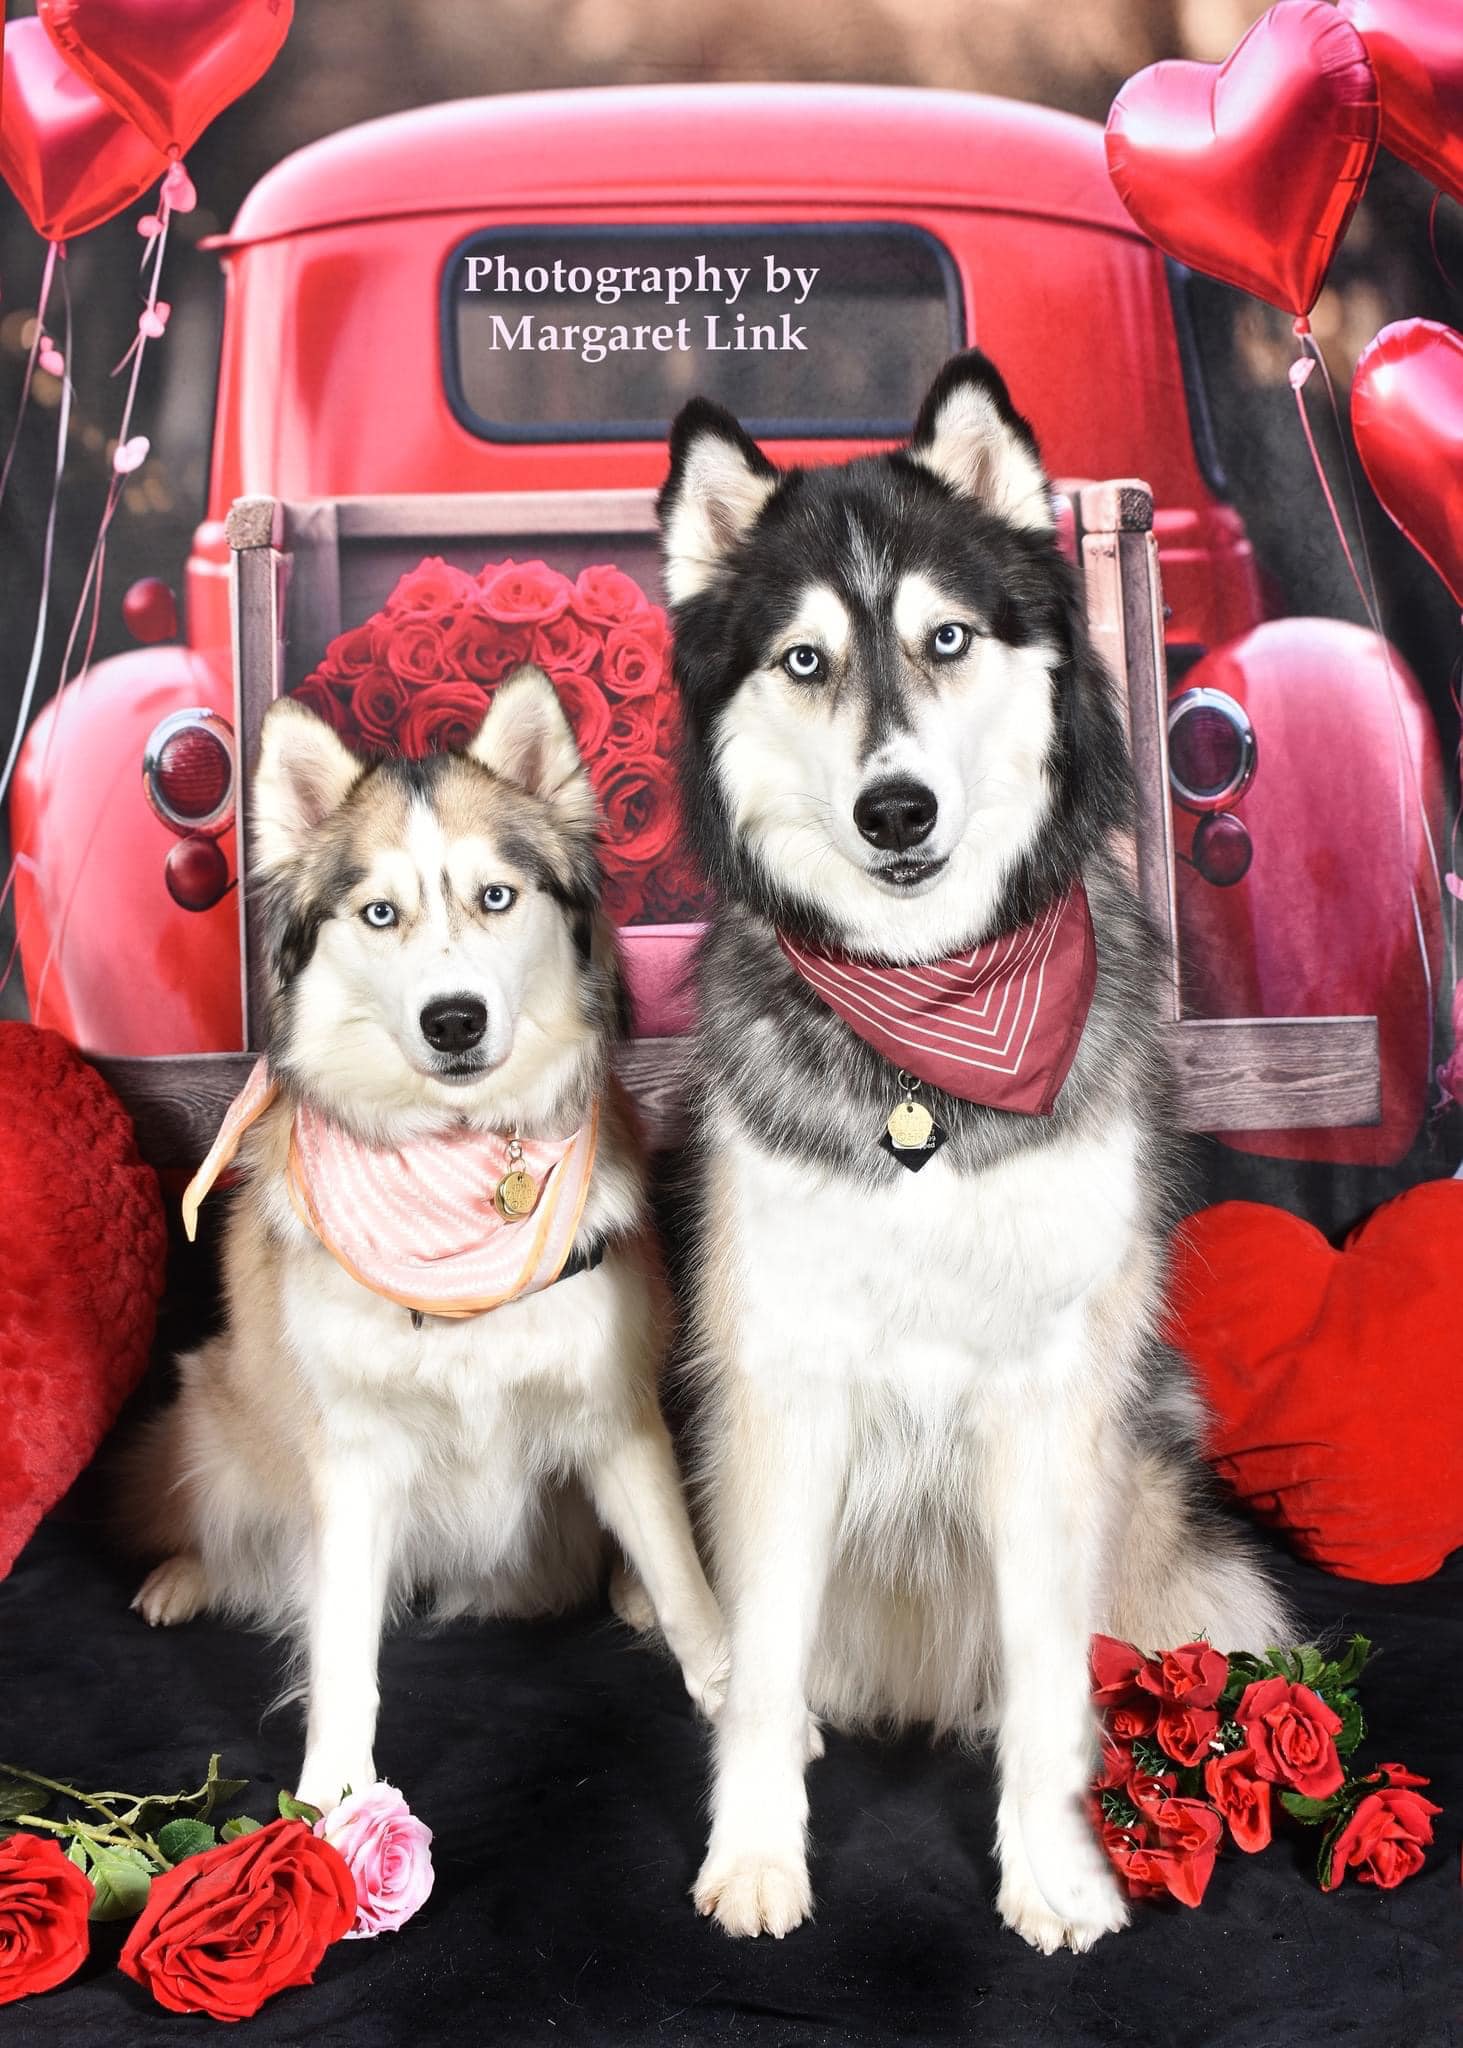 Kate Pet Valentine's Day Love Balloon Truck Backdrop Designed by Chain Photography